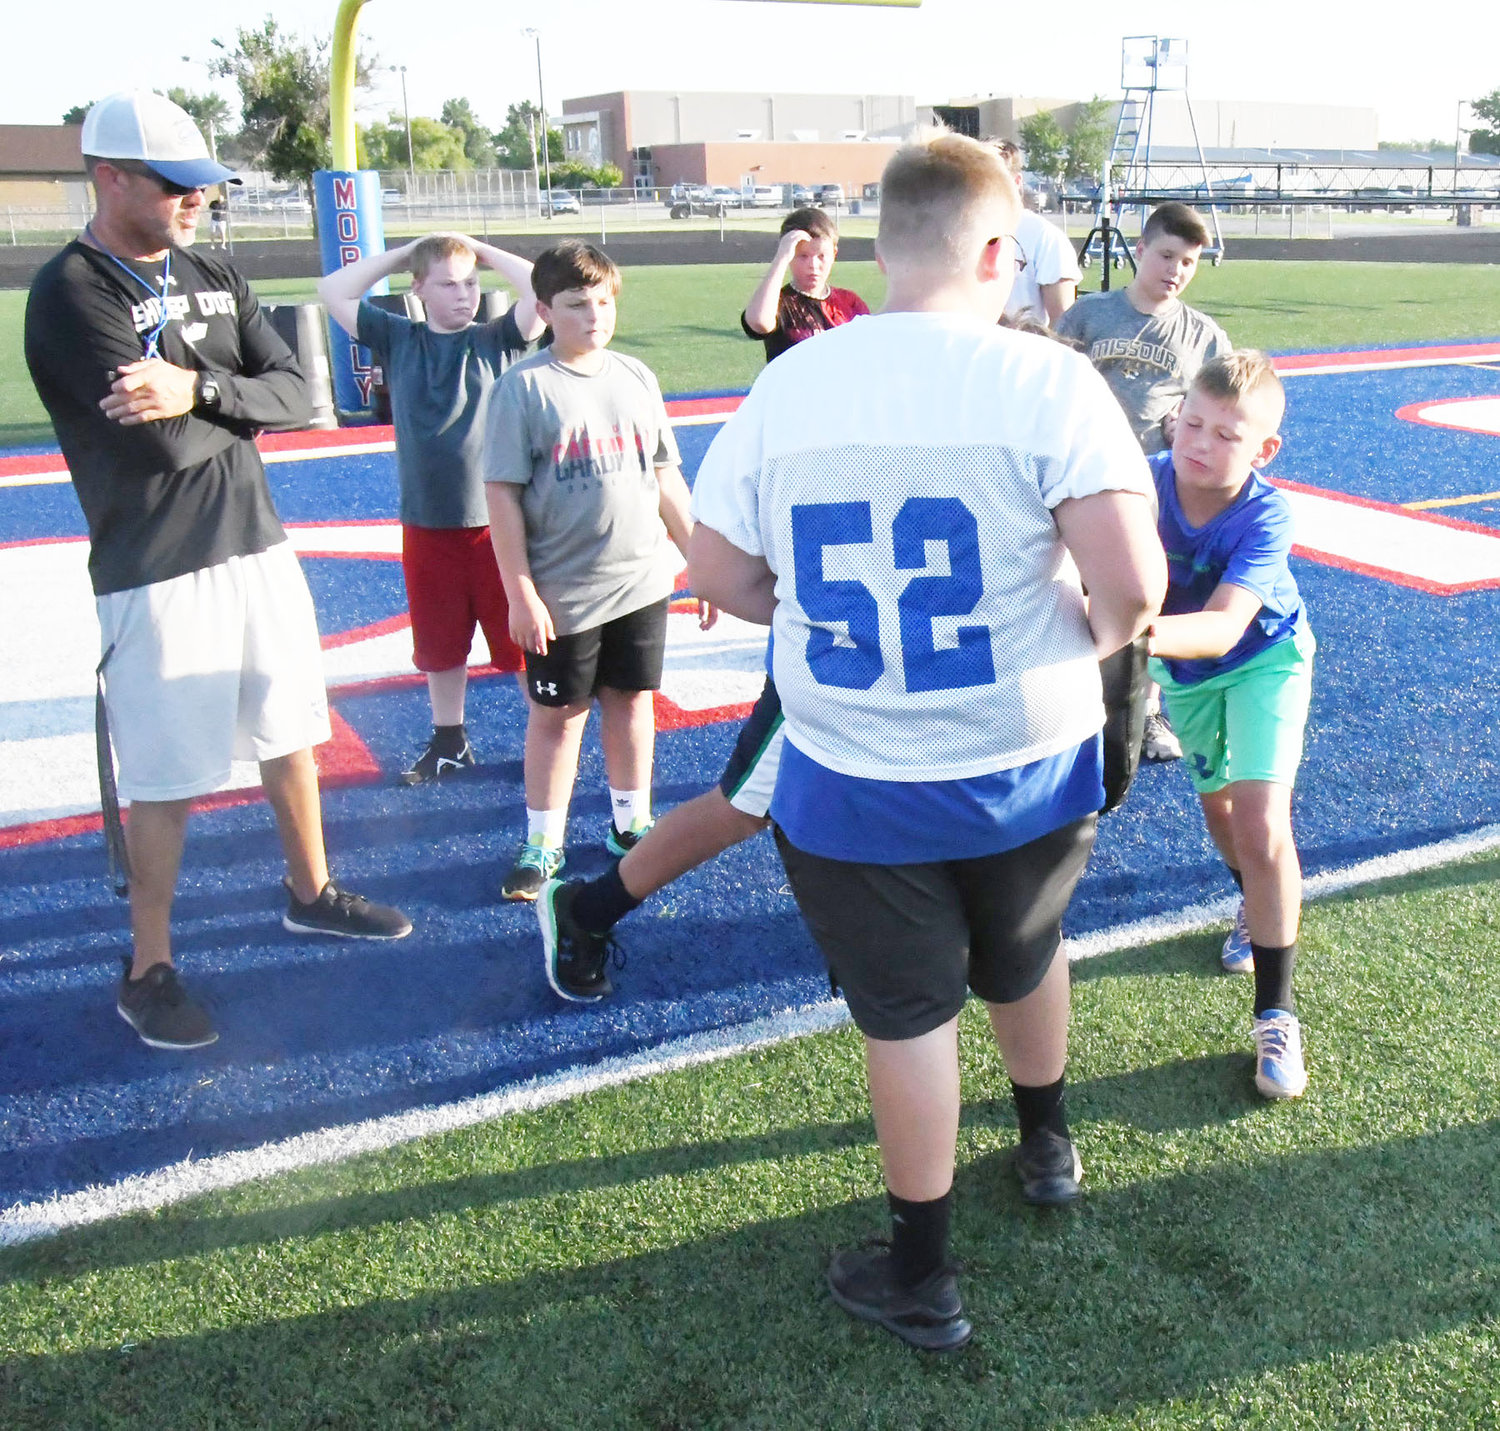 Moberly High School head football coach Cody McDowell worked mainly with the offensive linemen during drills, teaching them the Spartan way.